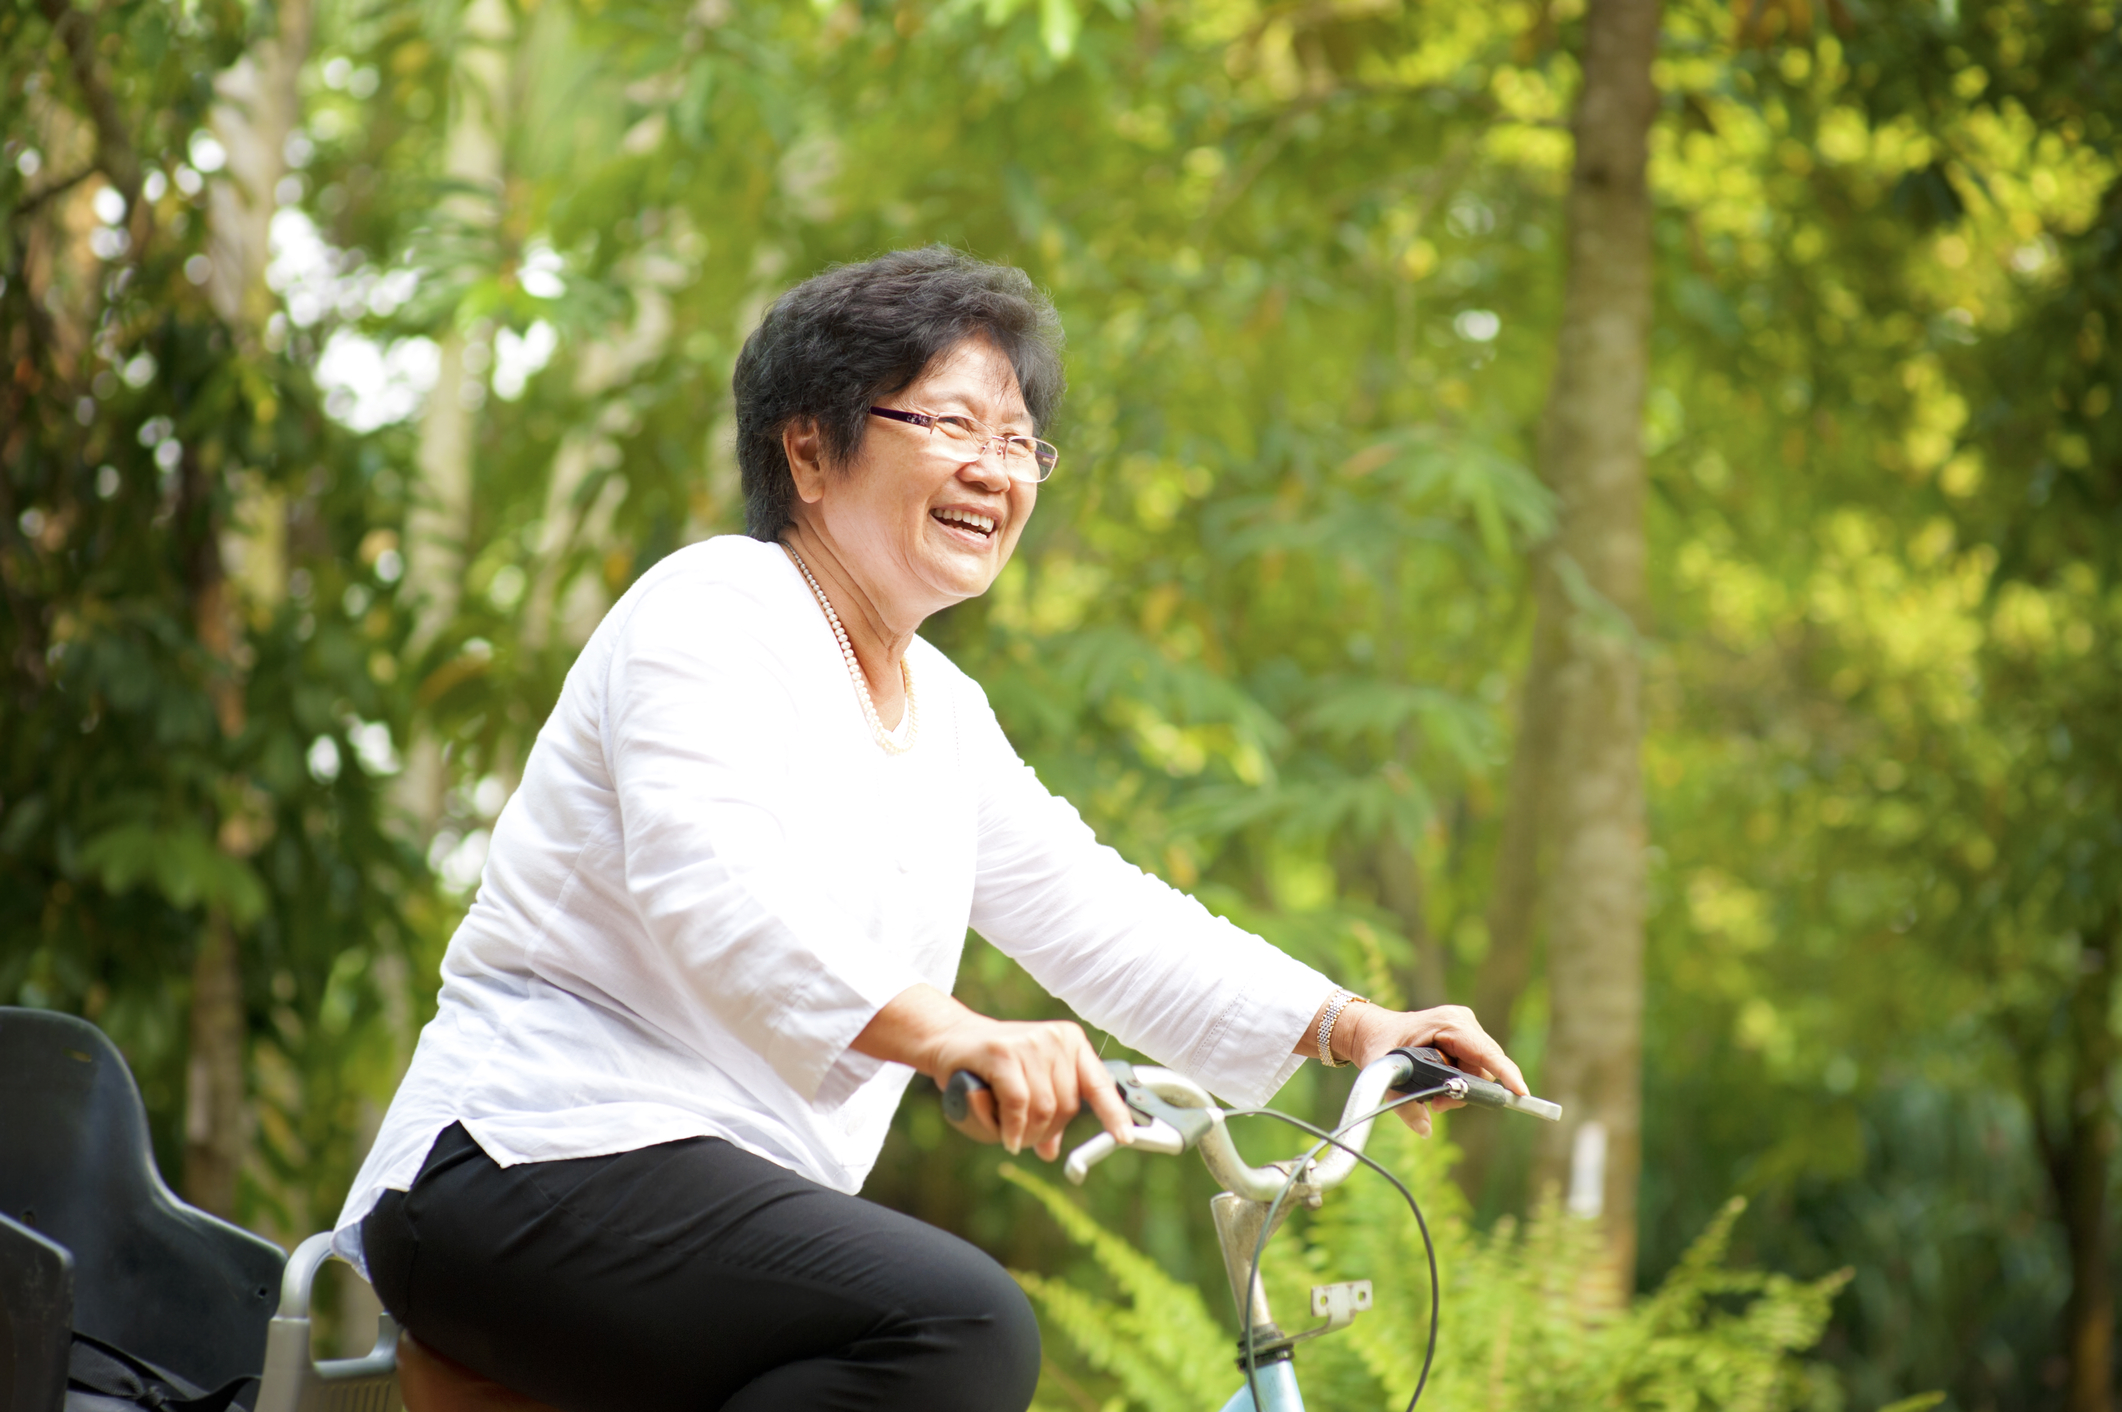 Boost your physical activity with some biking.